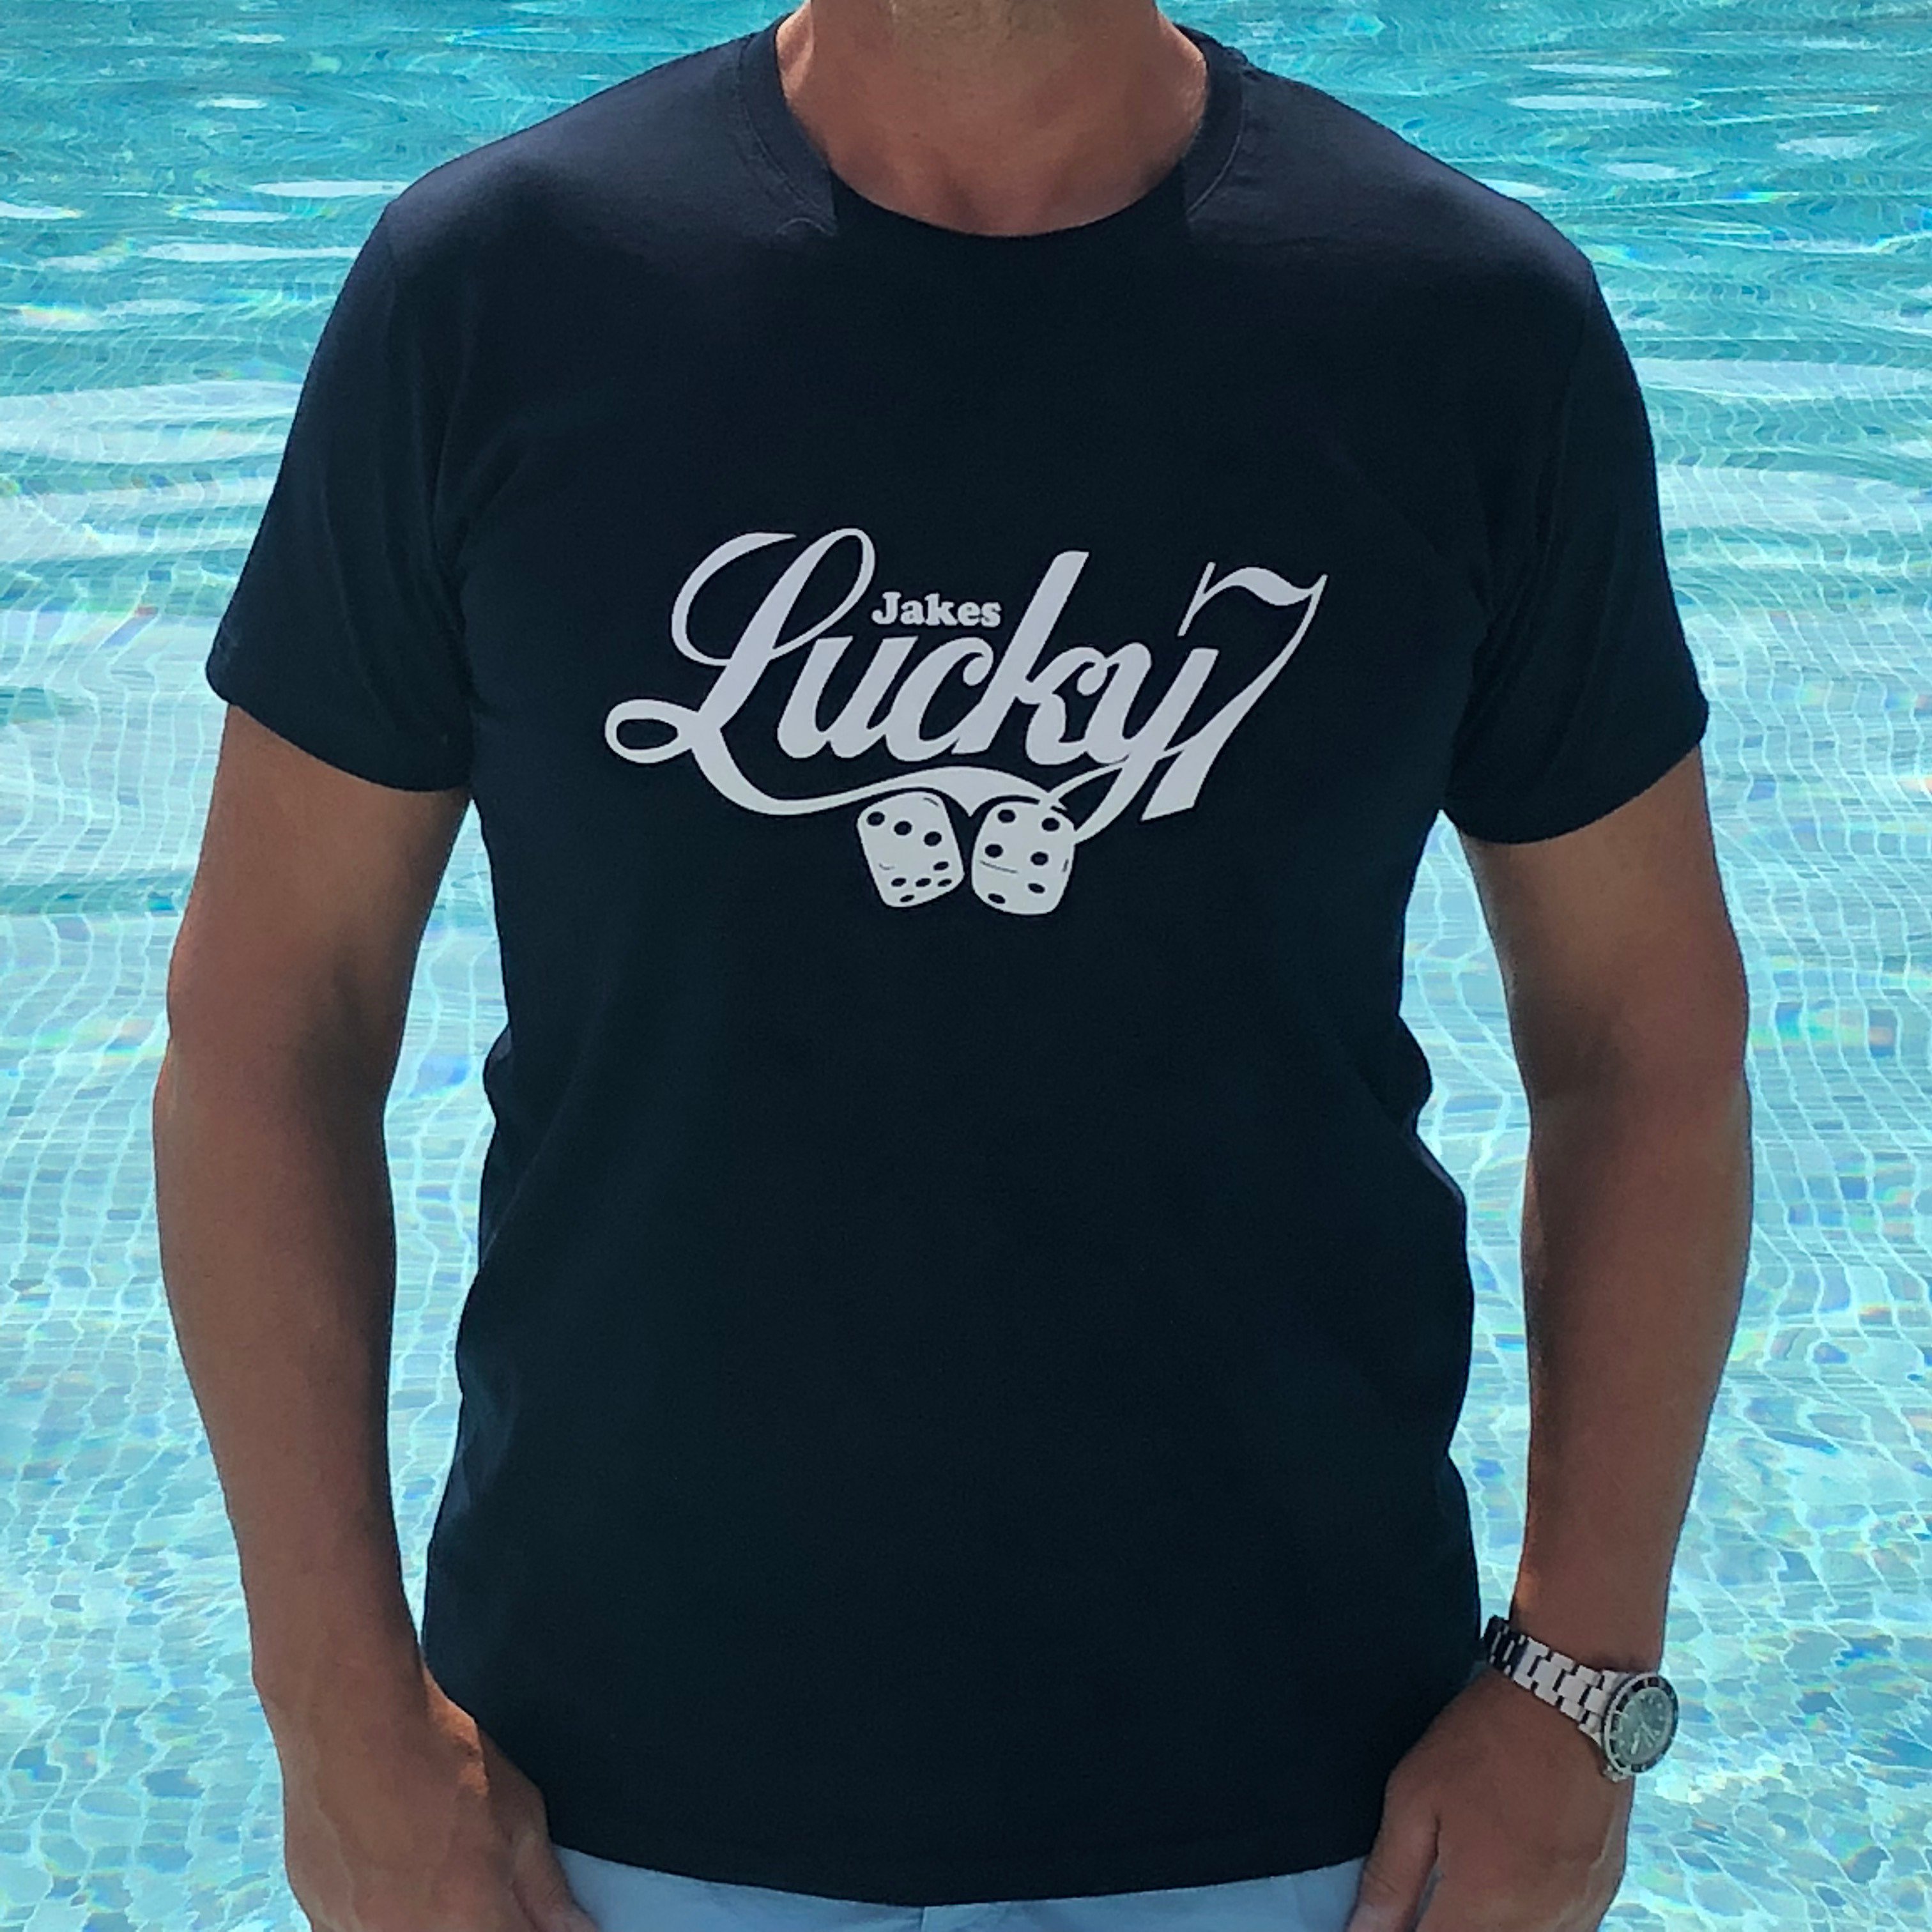 Jakes Lucky 7 on Twitter: "Most of Jakes designs have a vintage aesthetic and relaxed appearance, captured in the faded look of the prints. Jakes t-shirts are recognisable by the use